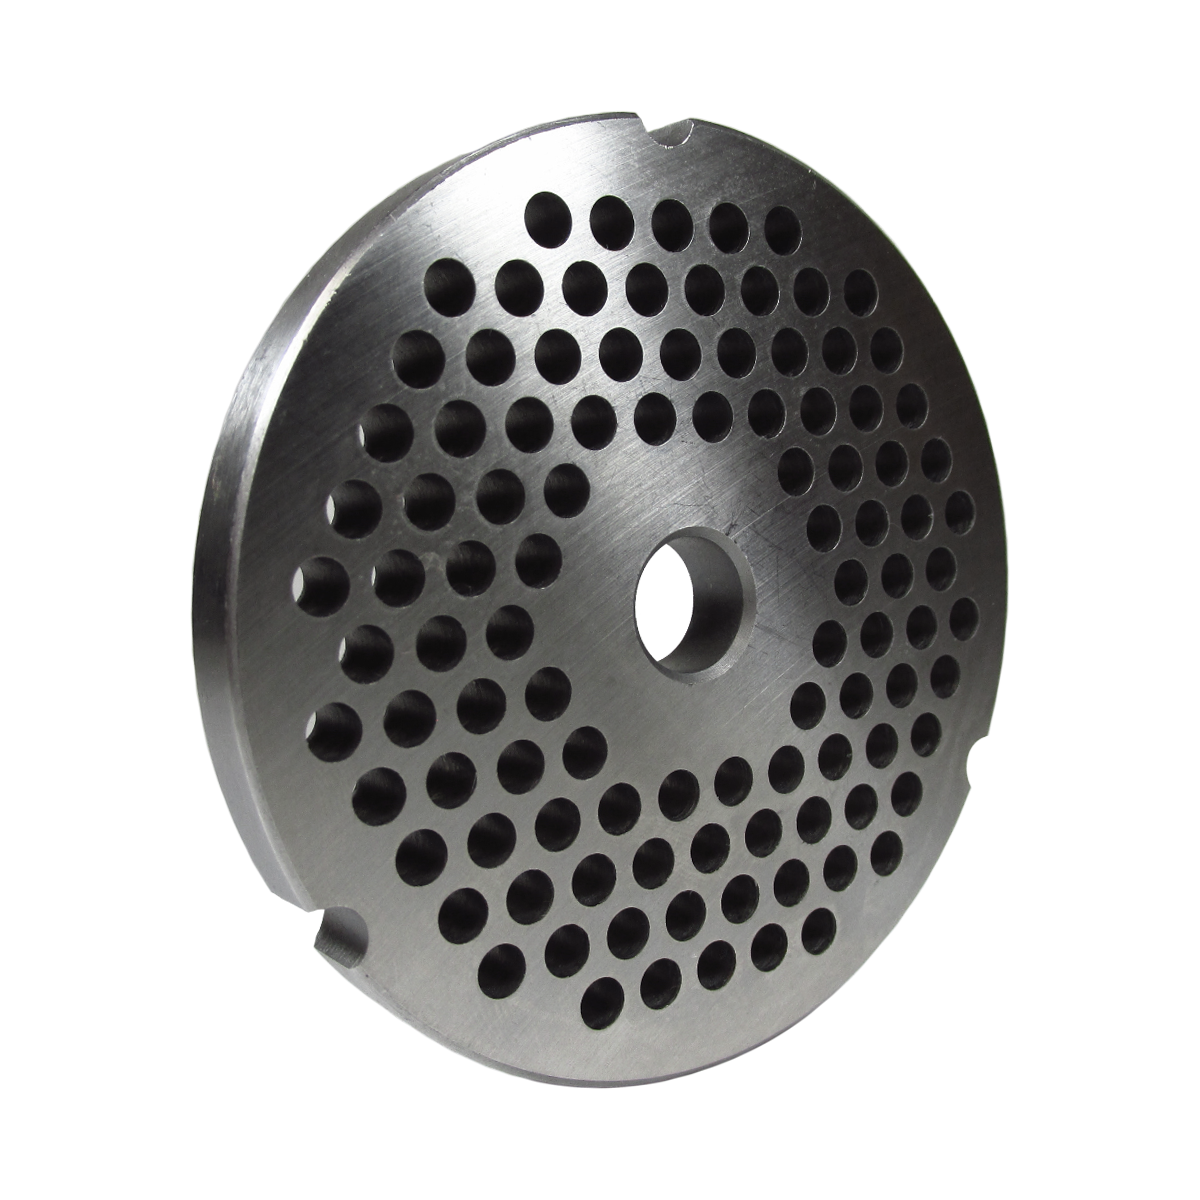 Grinder plate for #22 grinders with 1/4" hole, reversible